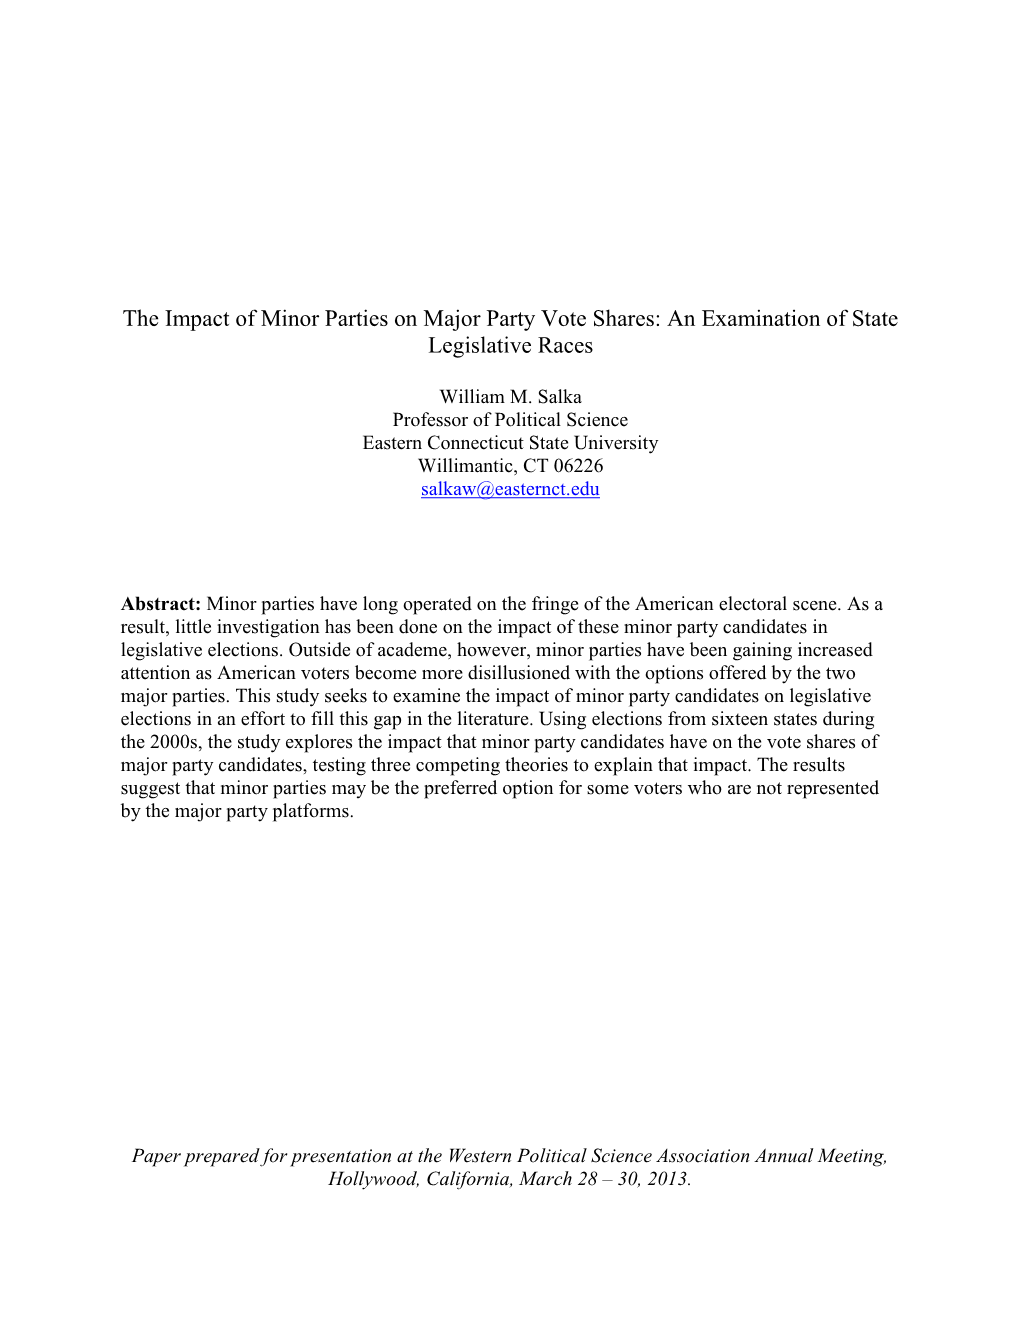 The Impact of Minor Parties on Major Party Vote Shares: an Examination of State Legislative Races